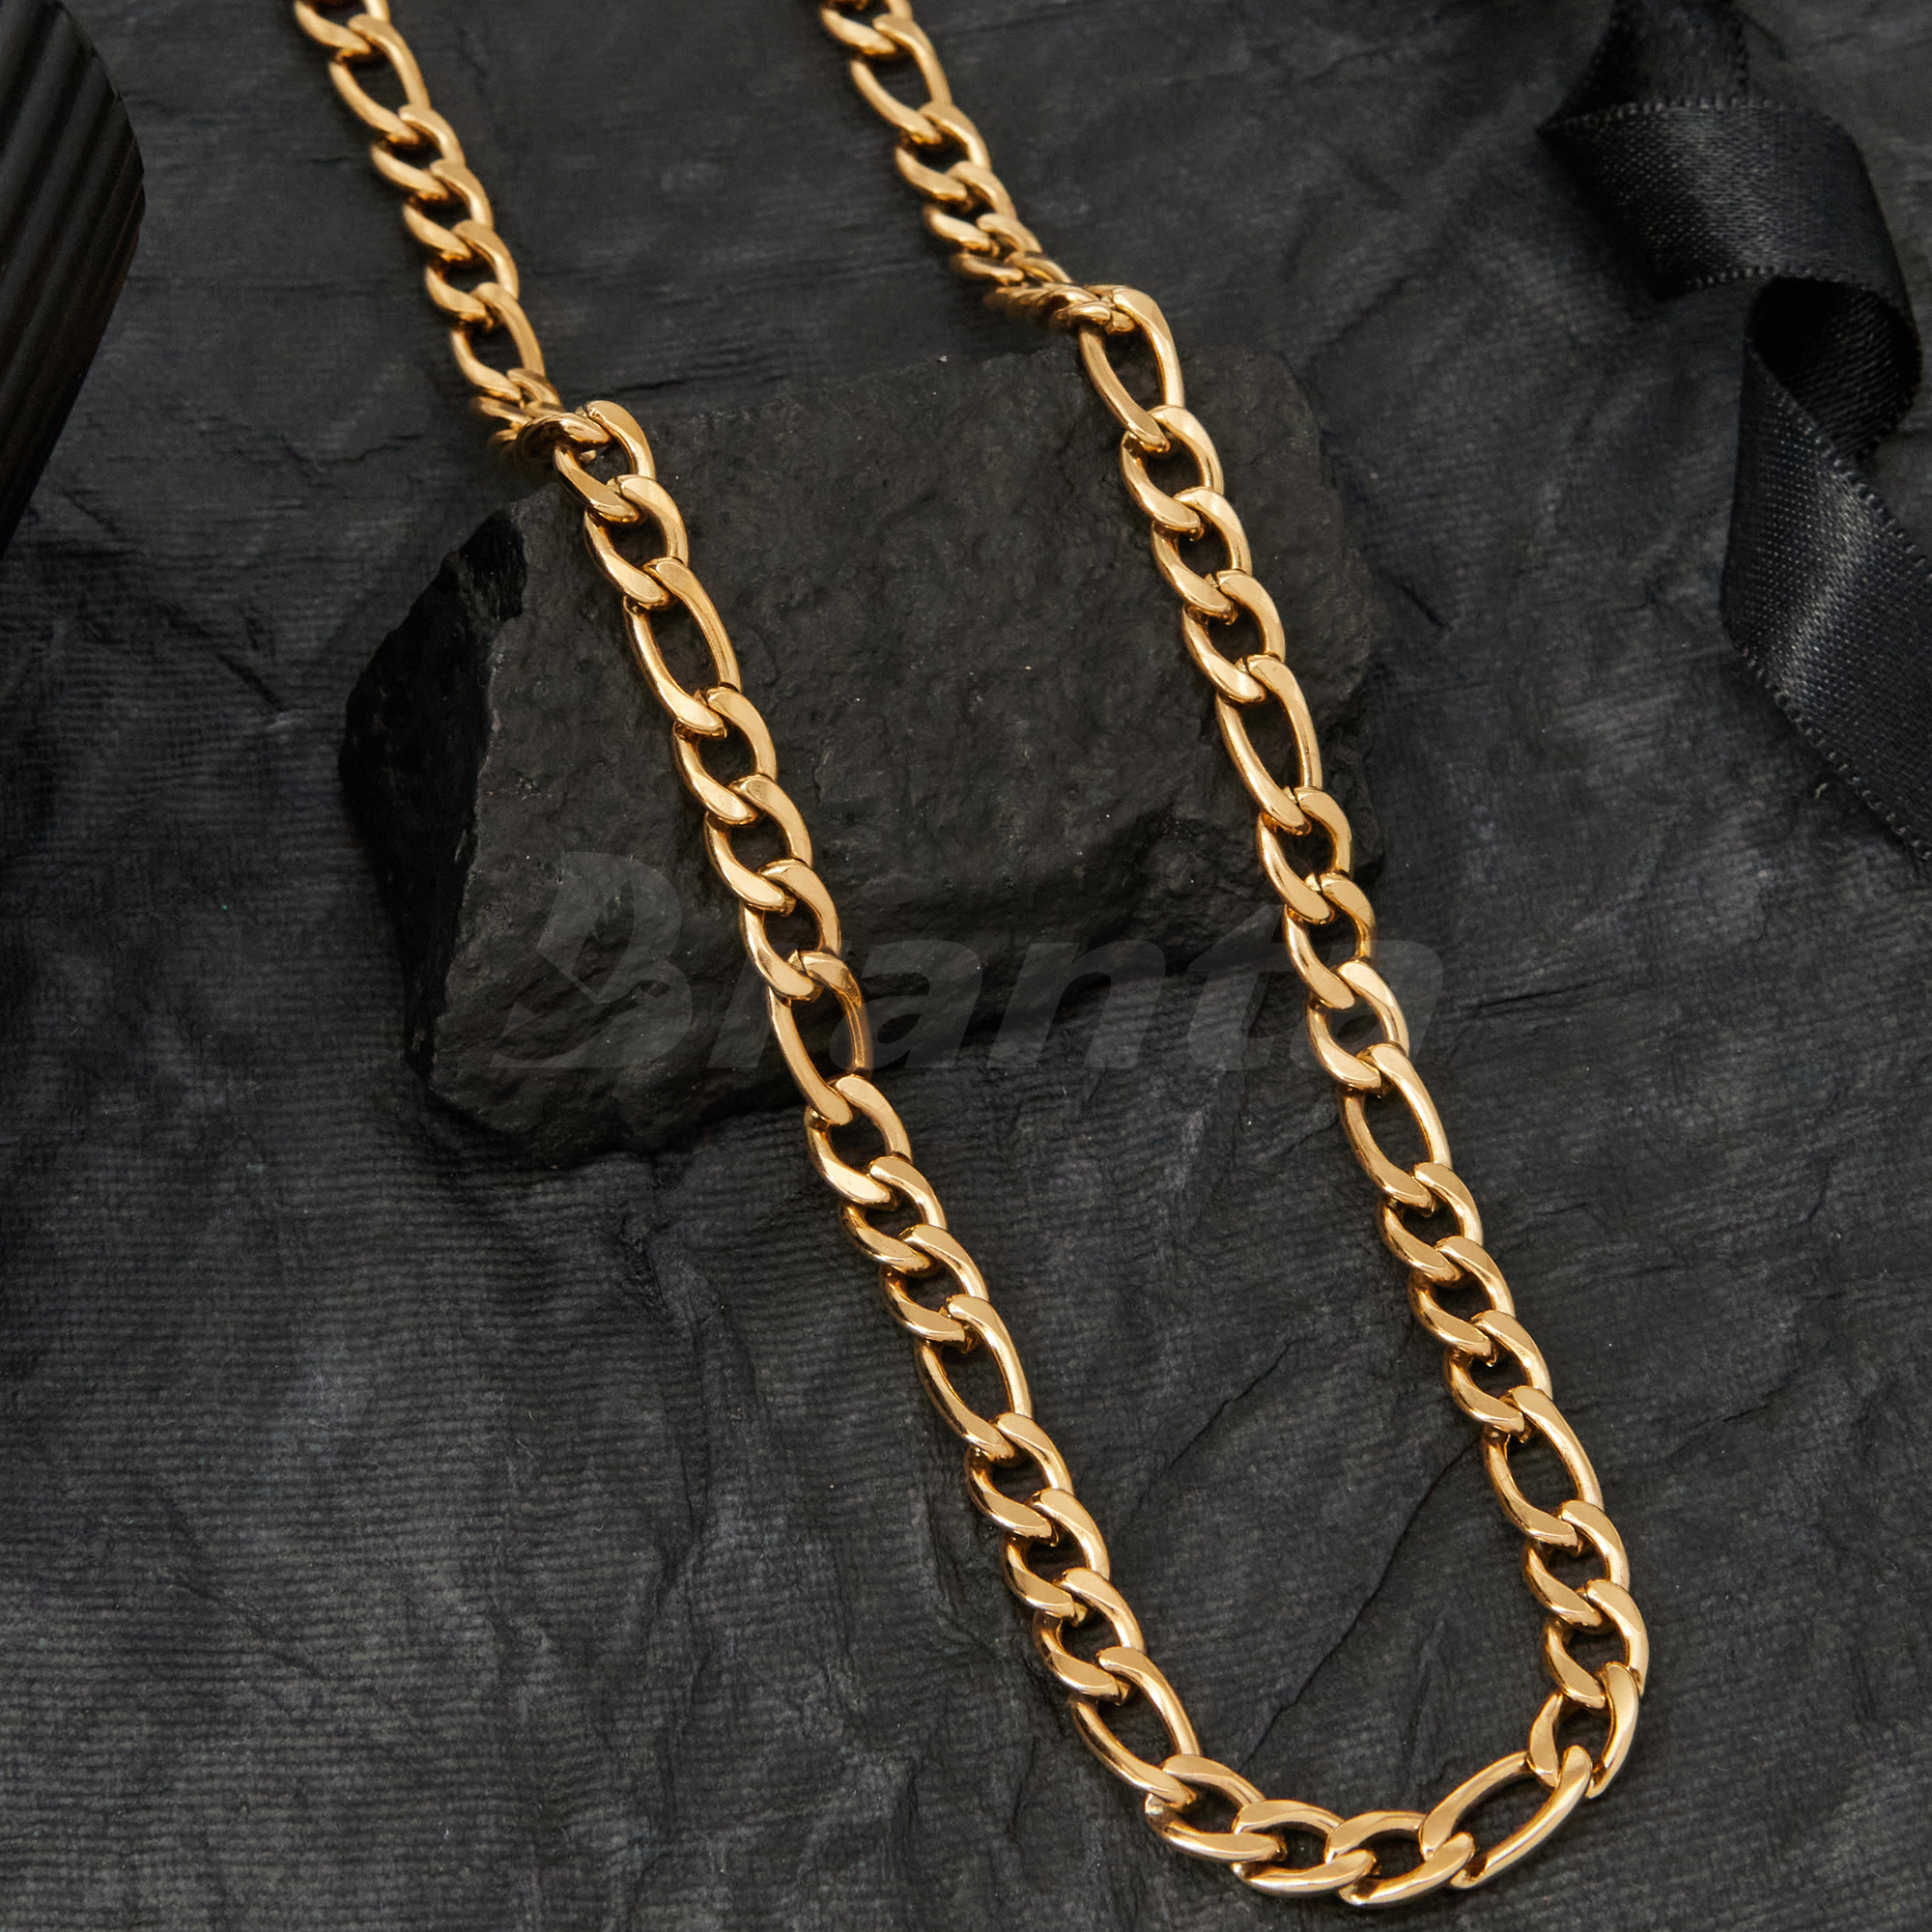 14k Gold Large Curb Link Chain Necklace - Zoe Lev Jewelry